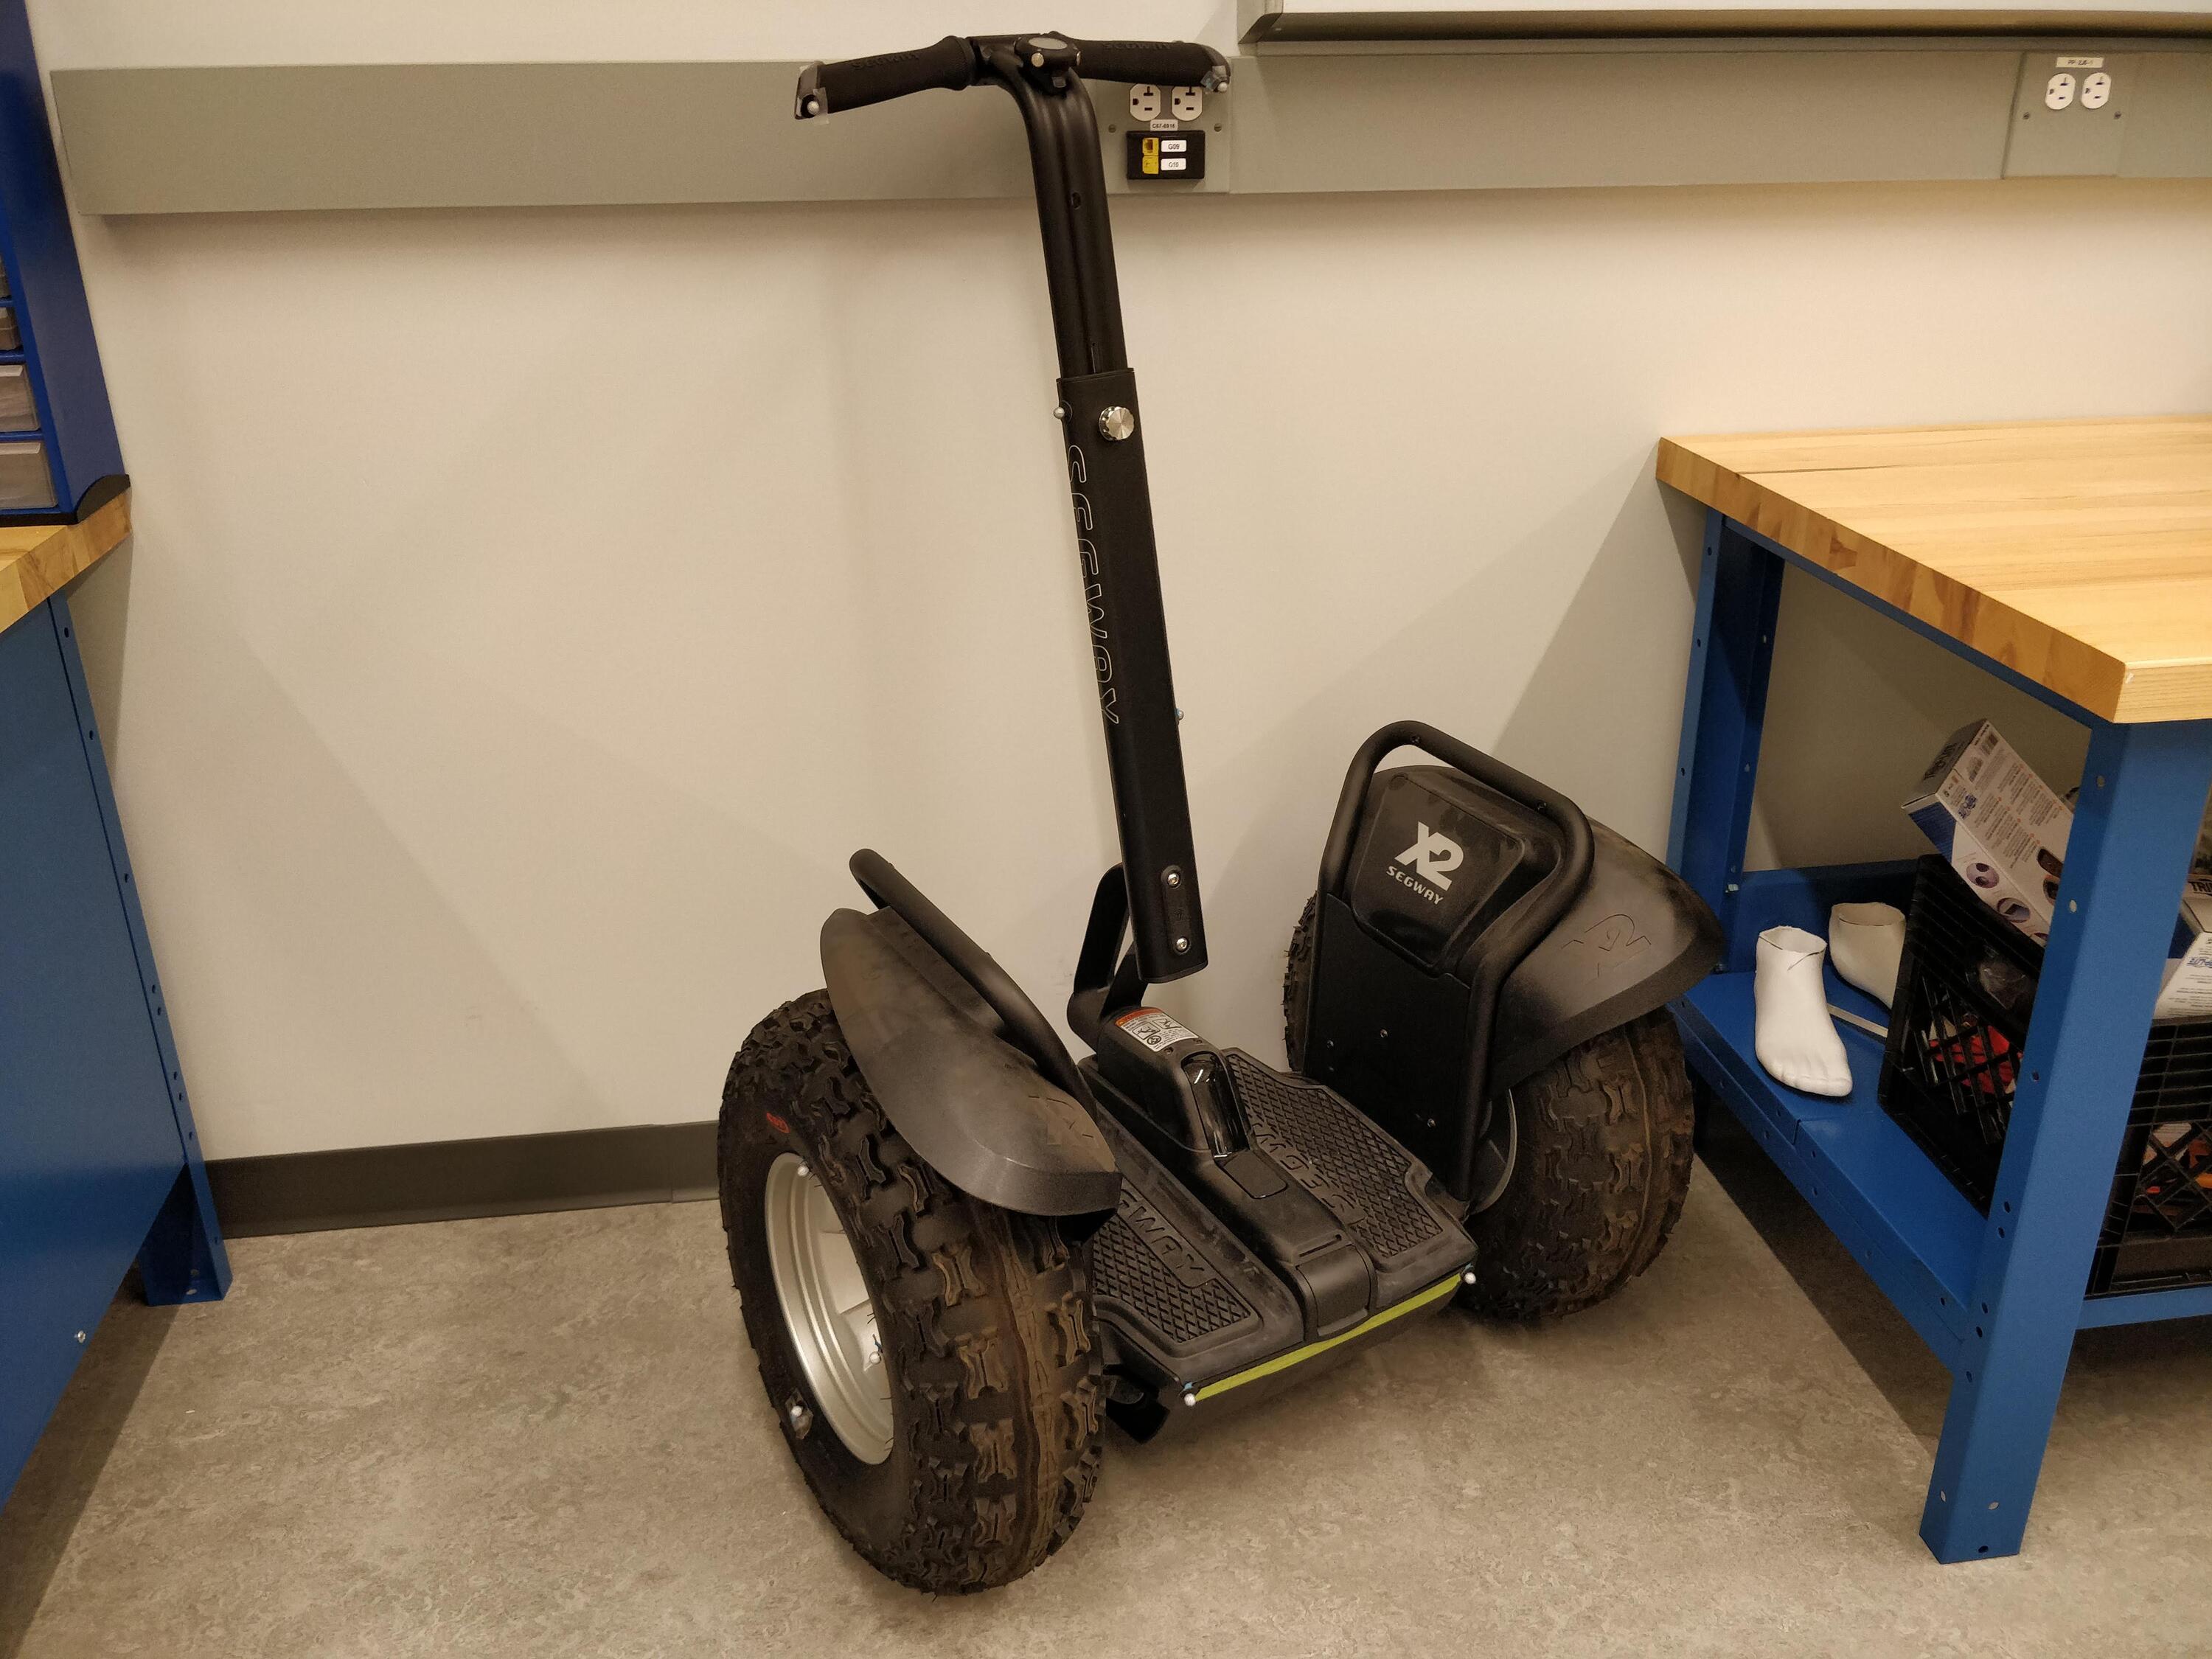 Segway used for research purposes with the REEM-C robot